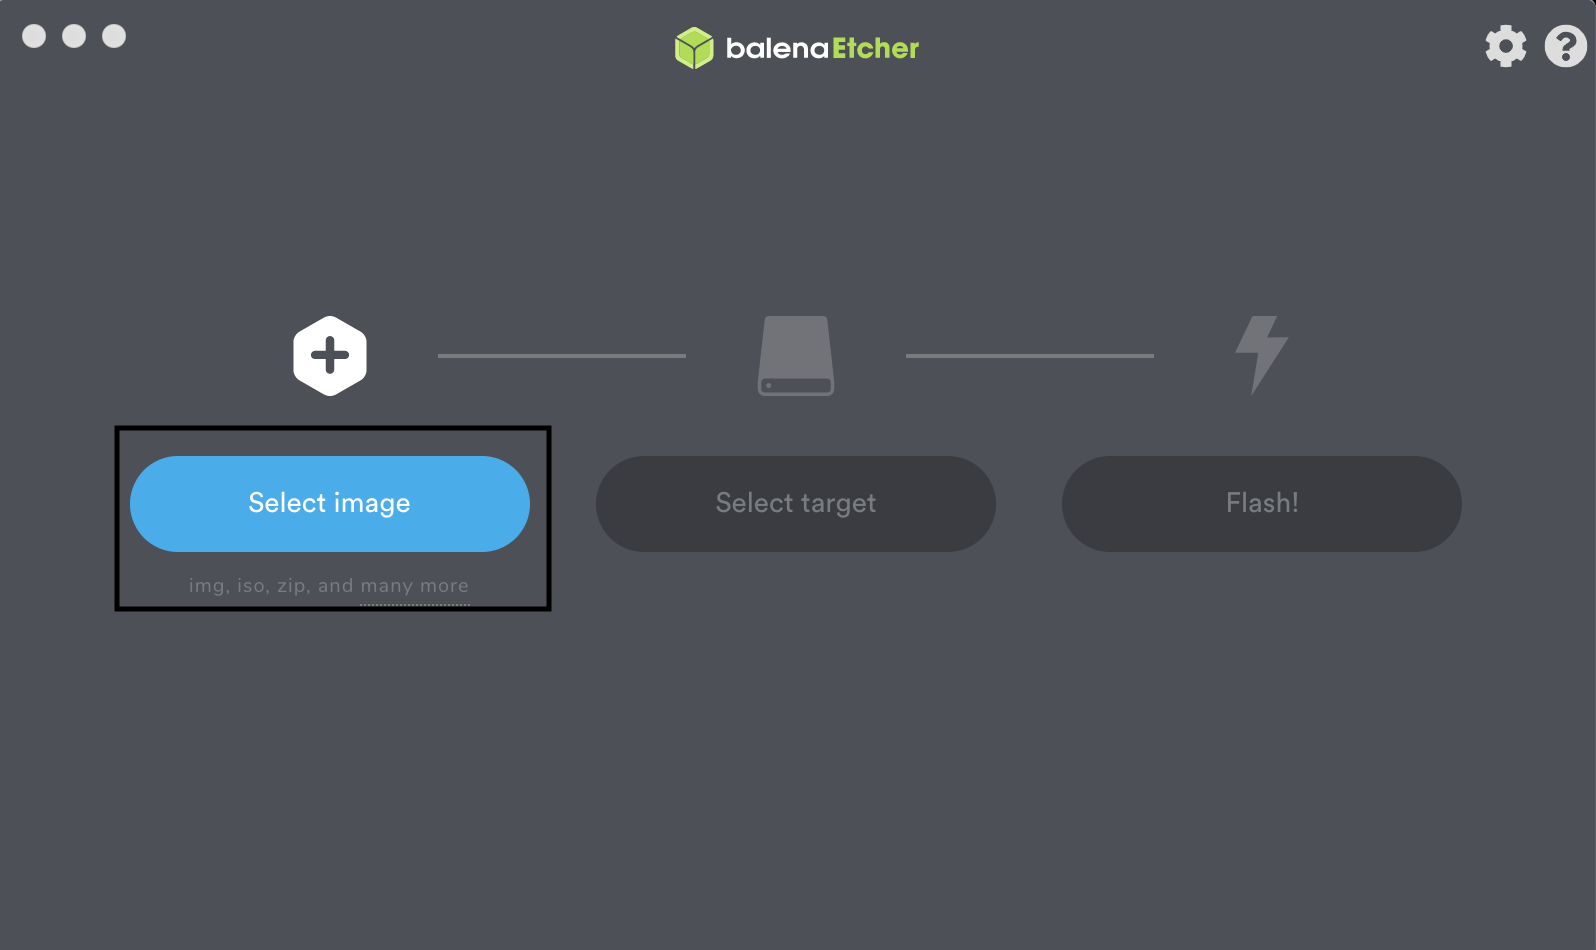 This image shows the "Select image" button in BalenaEtcher.